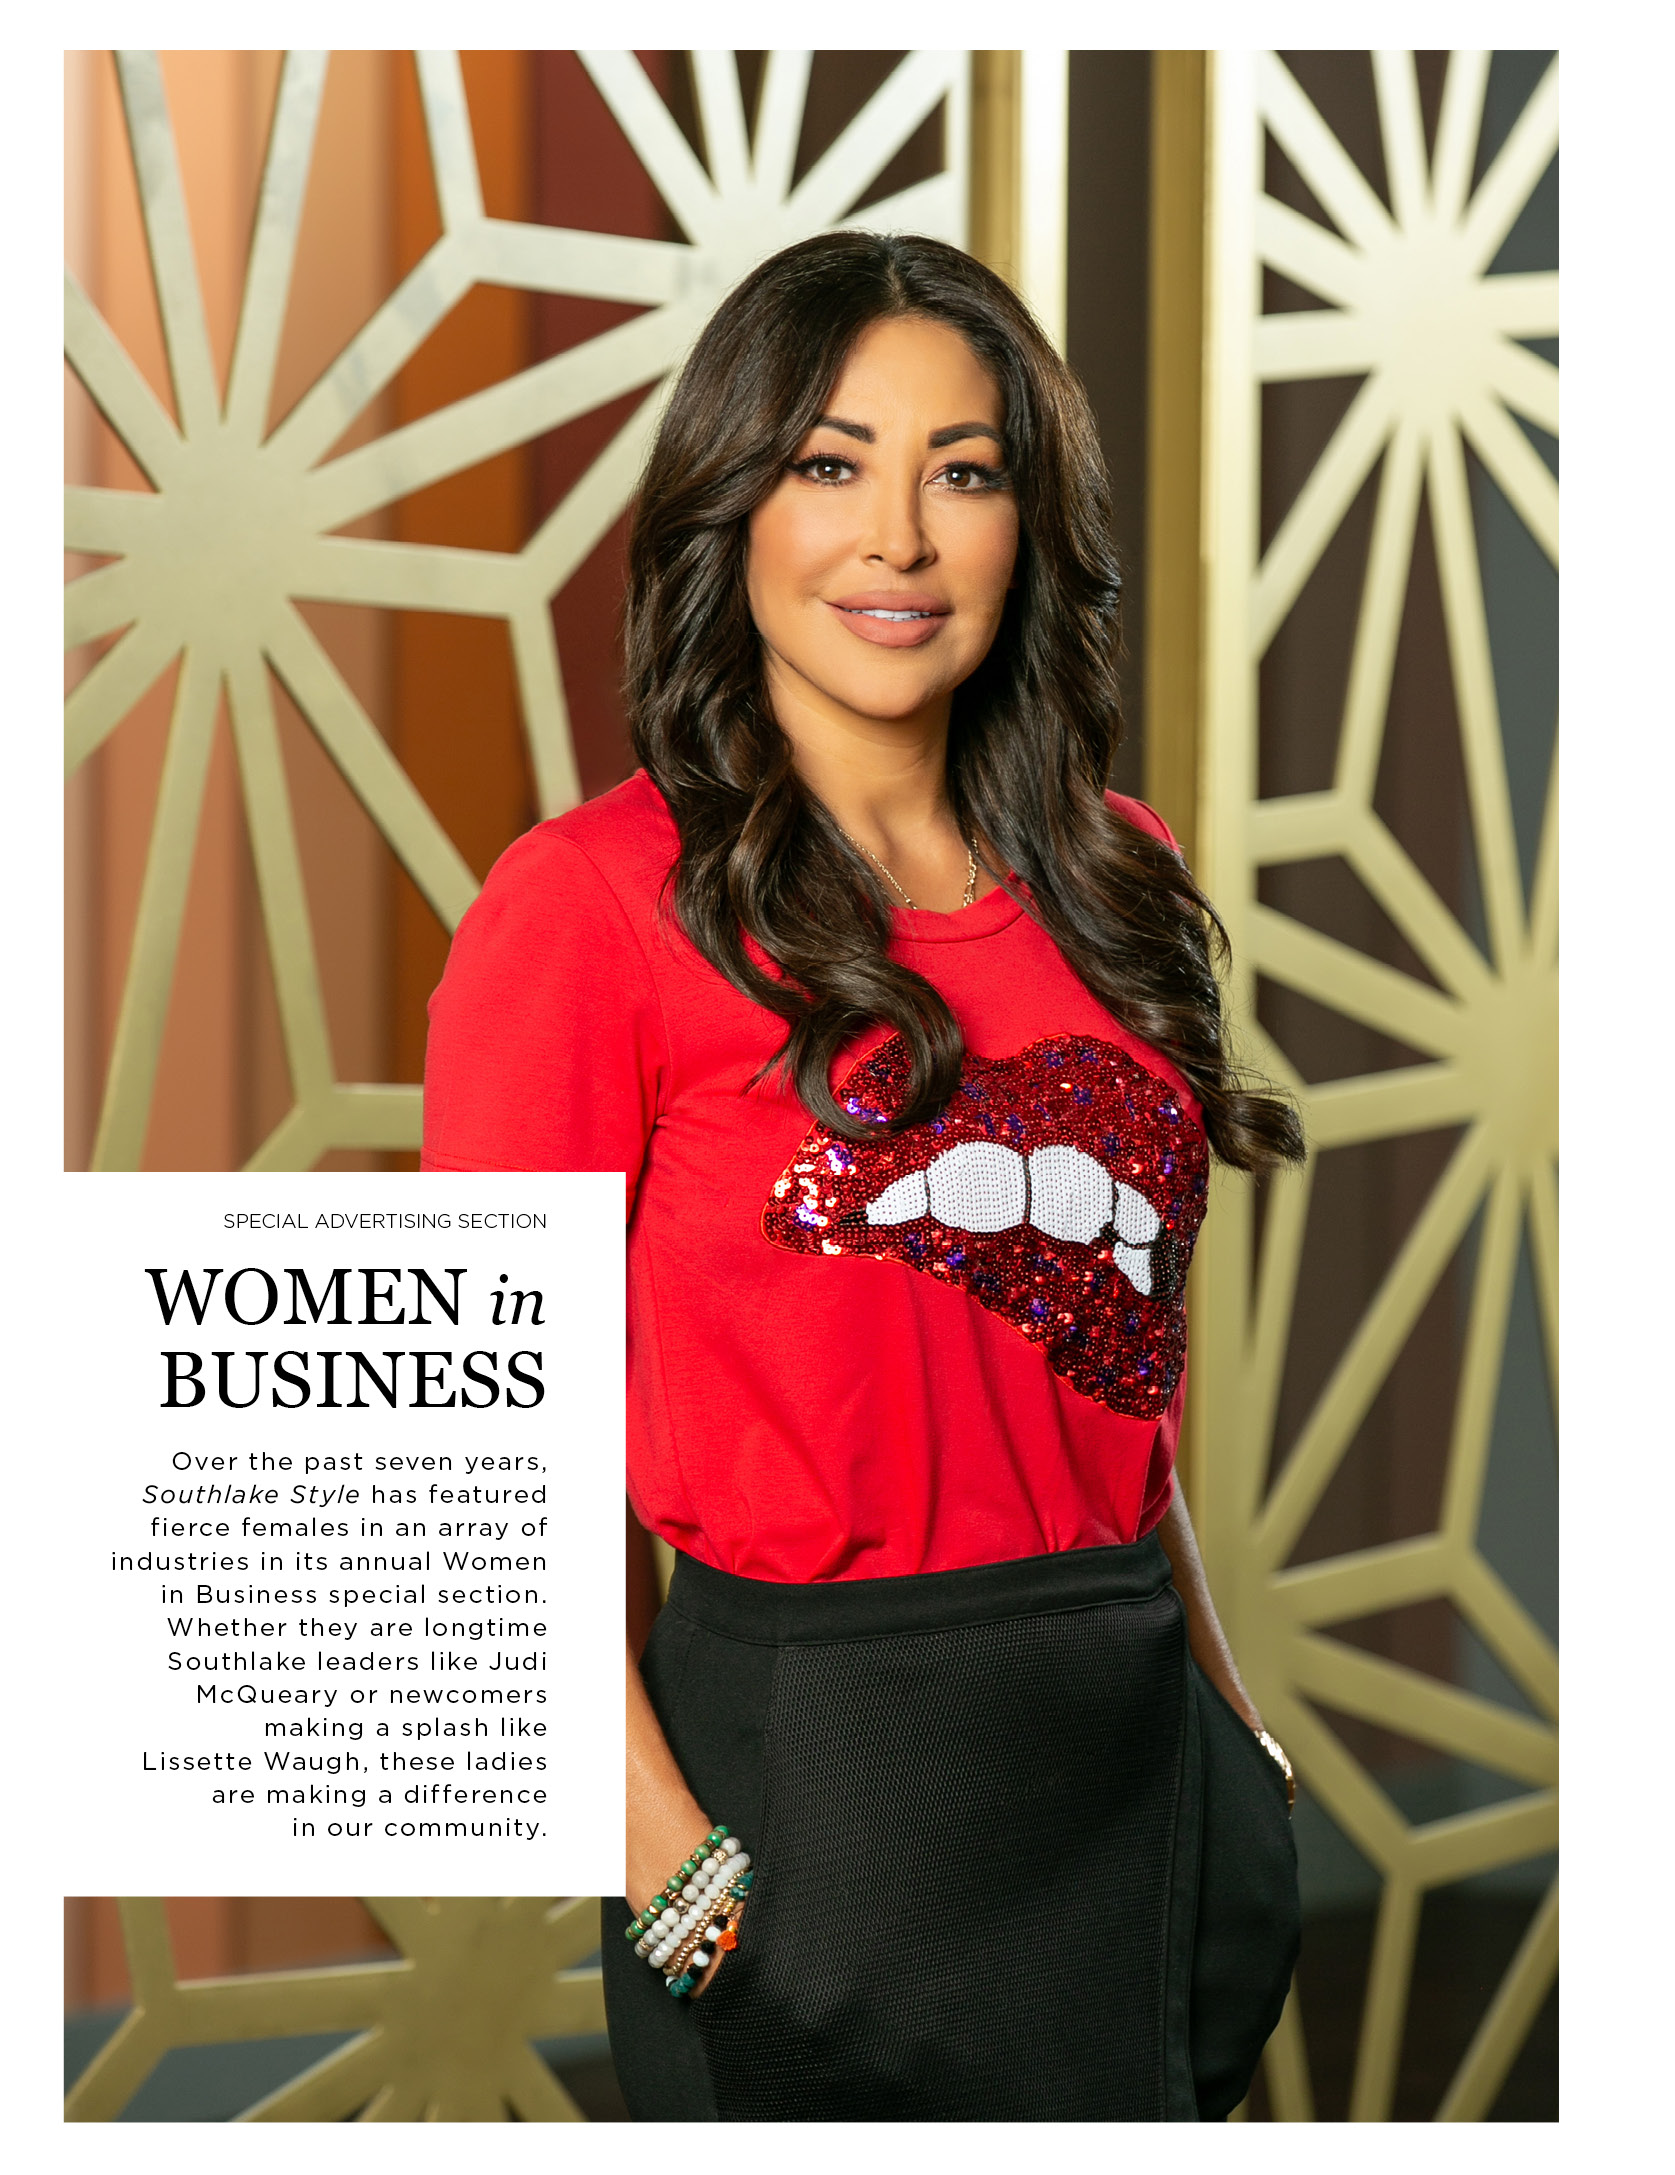 Women In Business 2020 for Southlake Style magazine